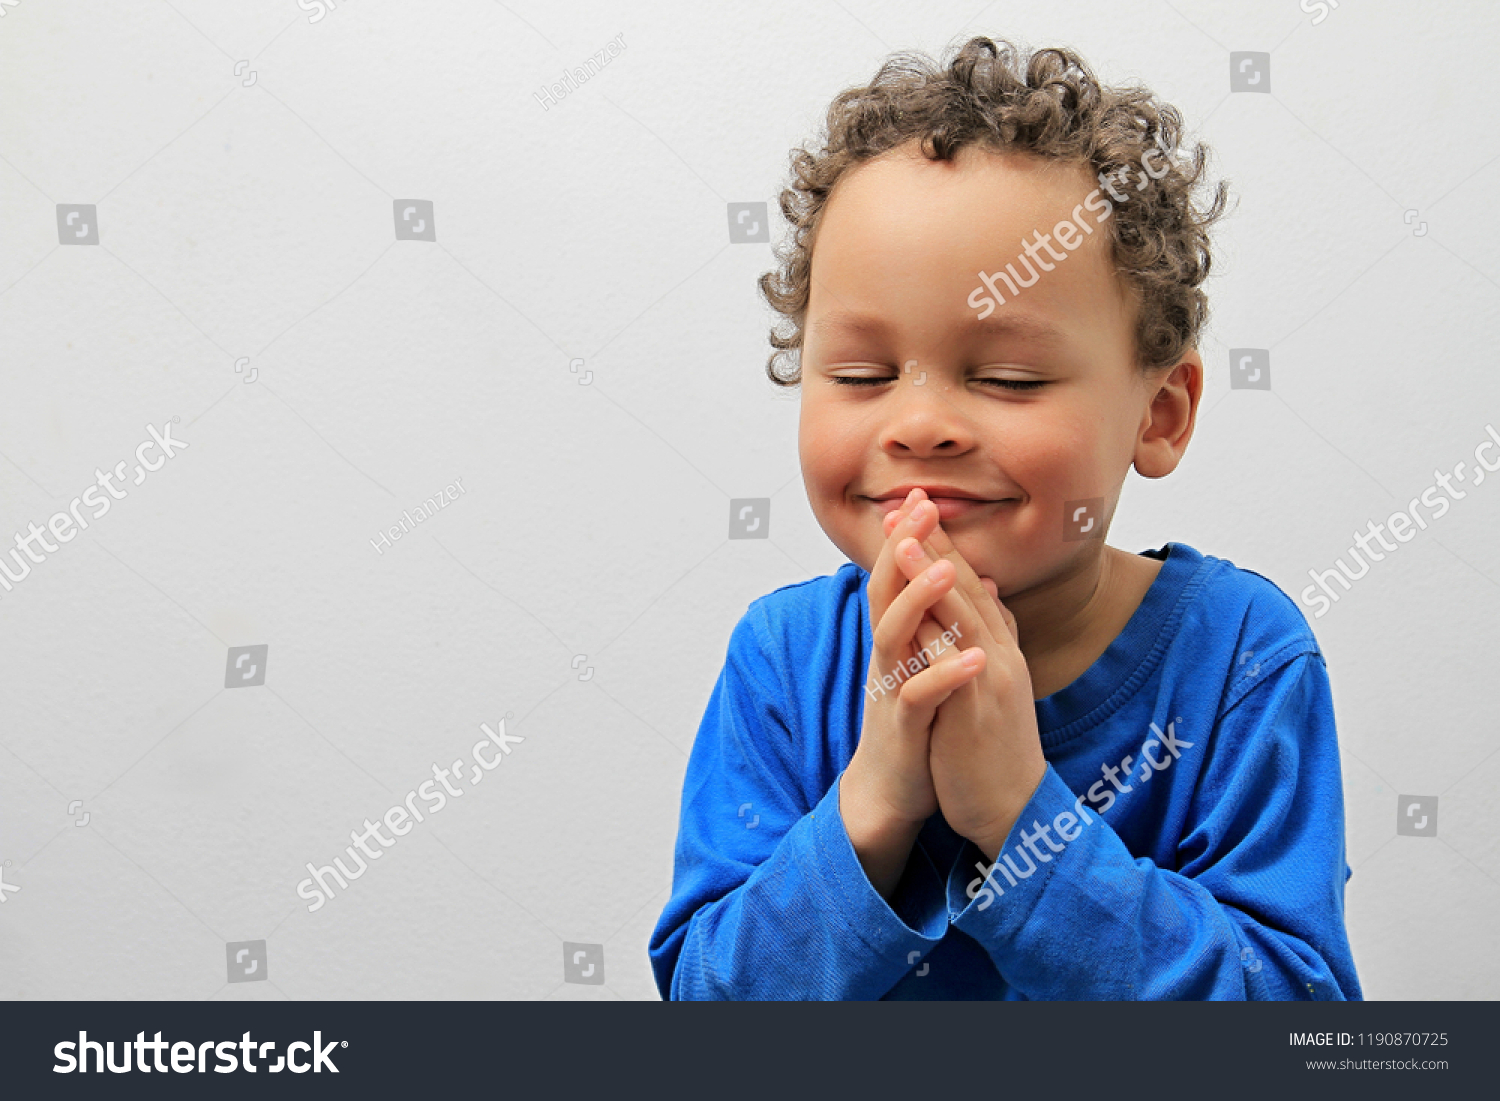 boy praying to god with a smile on his face stock image stock photo #1190870725